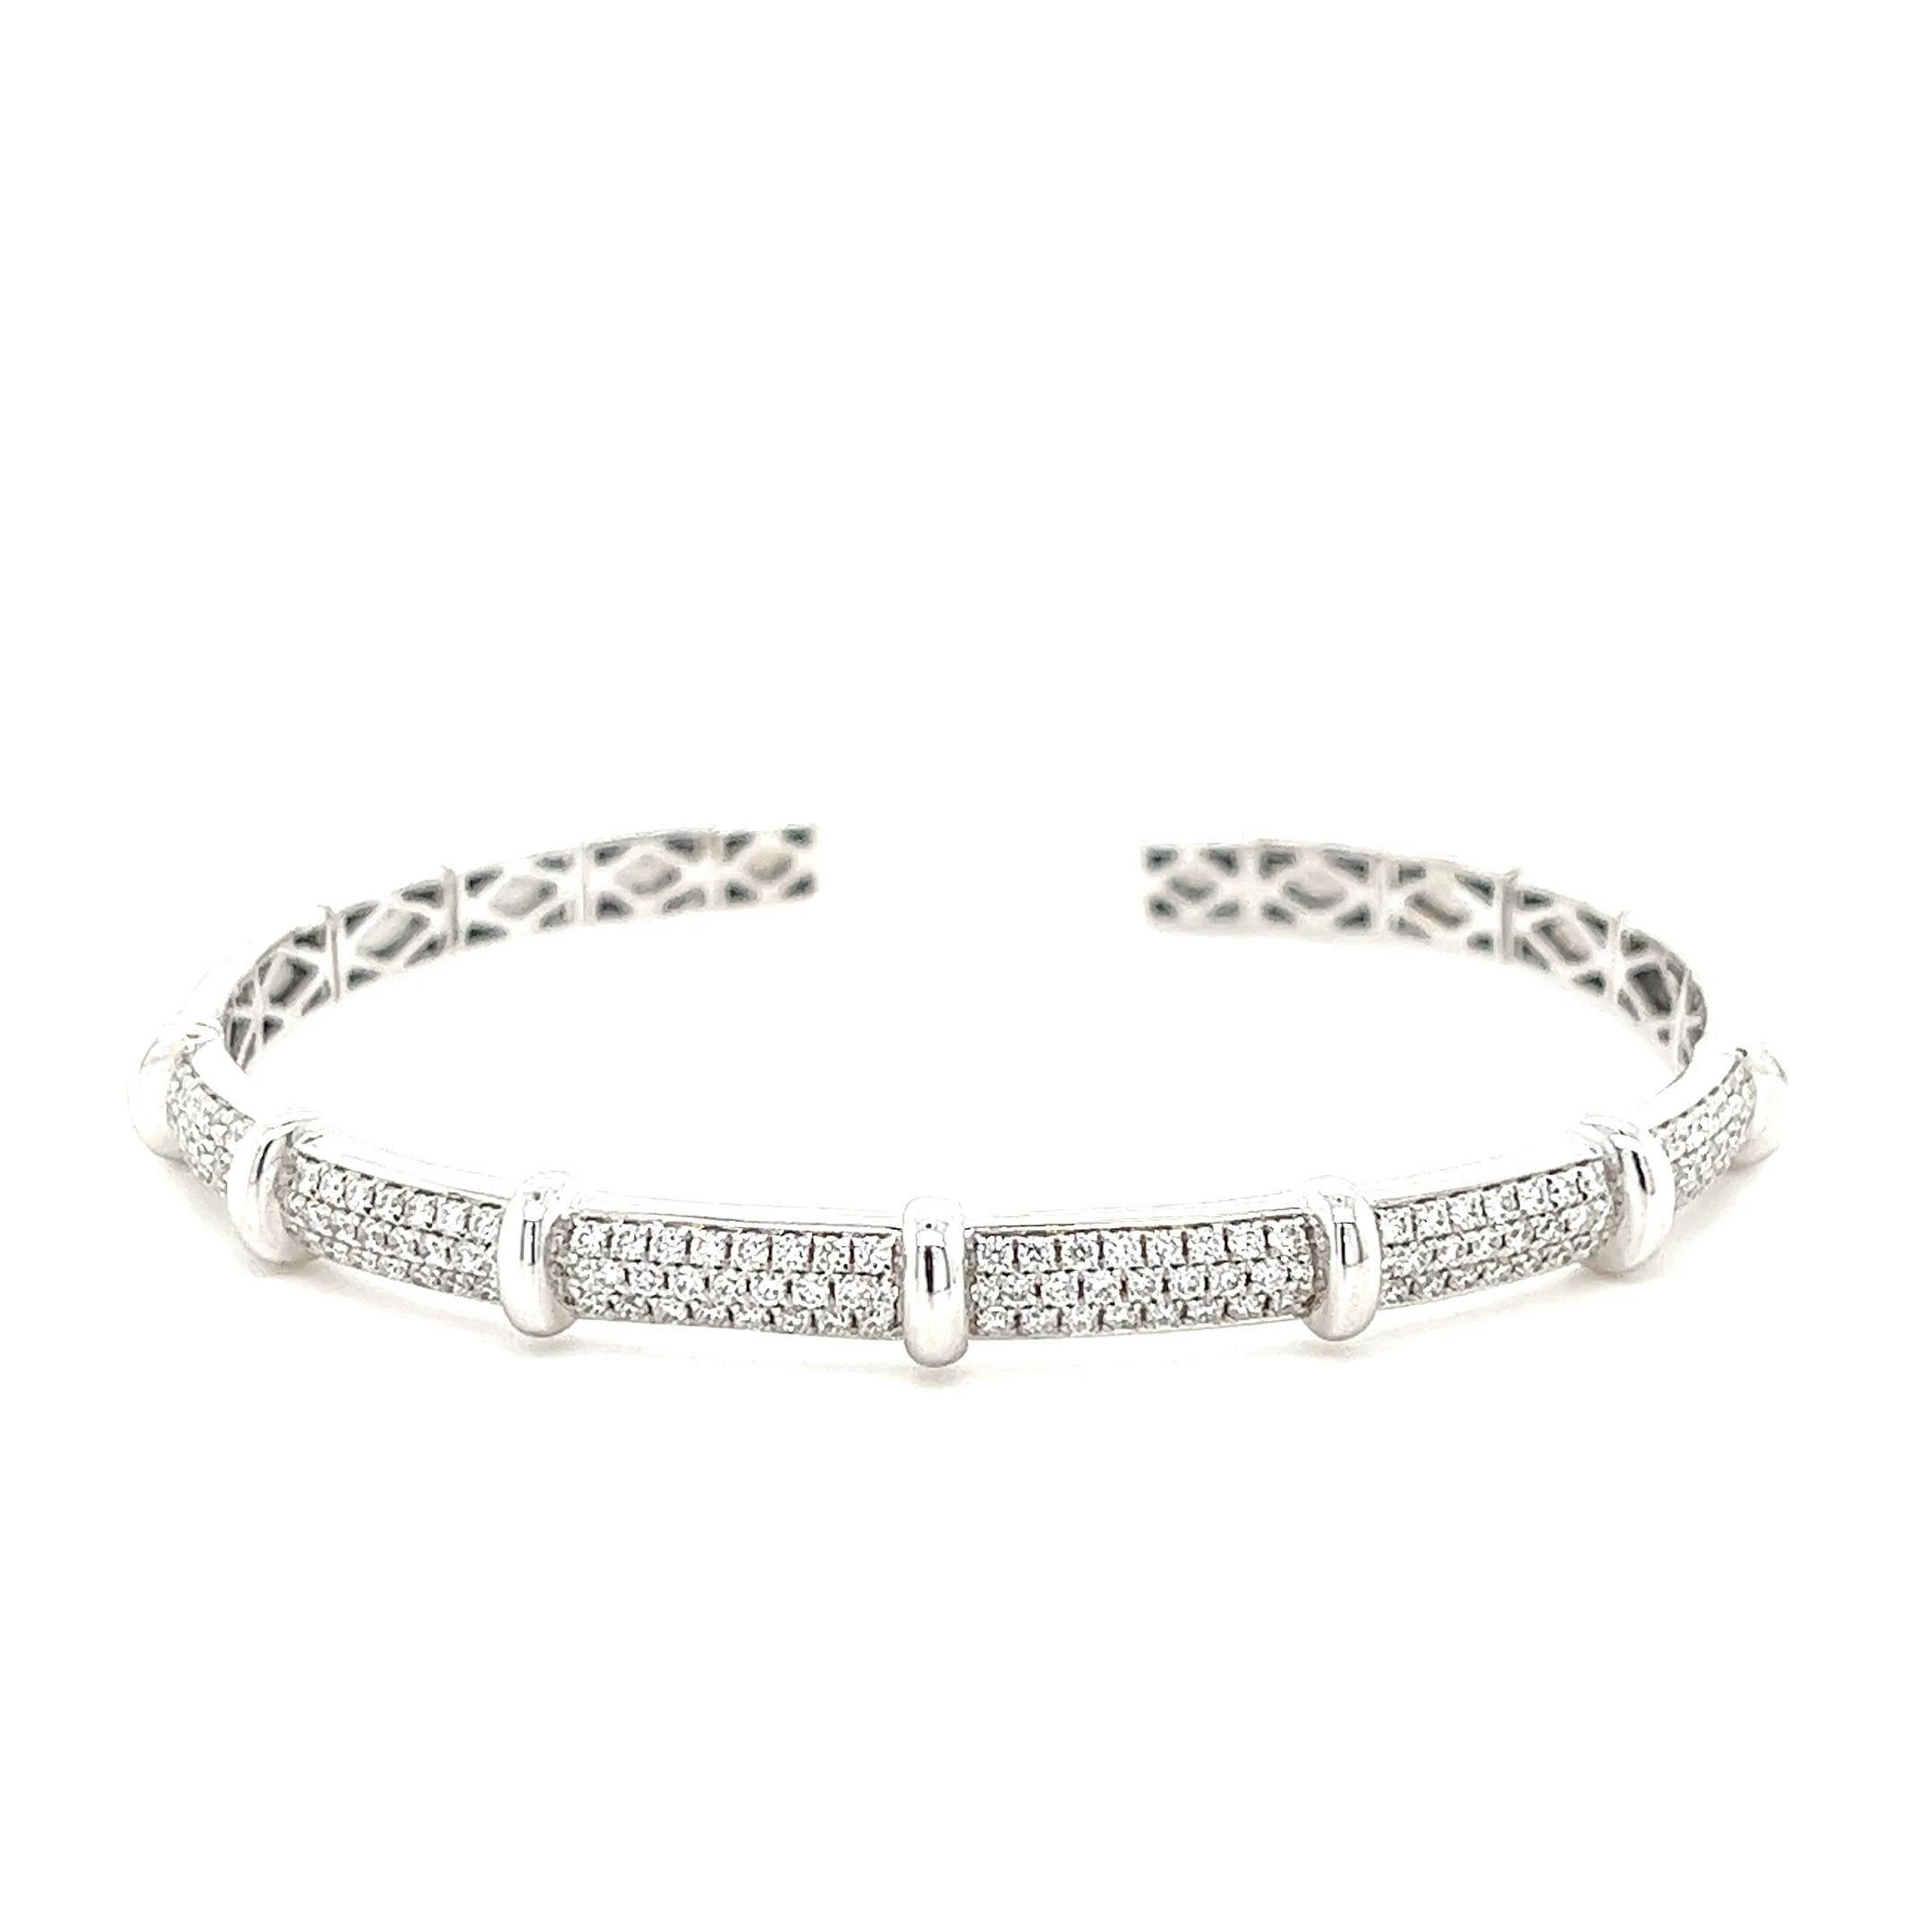 18K White Gold Bracelet with Diamonds


18K White Gold - 10.66 GM
94 Diamonds - 0.56 CT
Size - 45X55 mm

Elevate your style with the captivating beauty of this enchanting 18K White Gold Bracelet embellished with a mesmerizing array of 94 sparkling